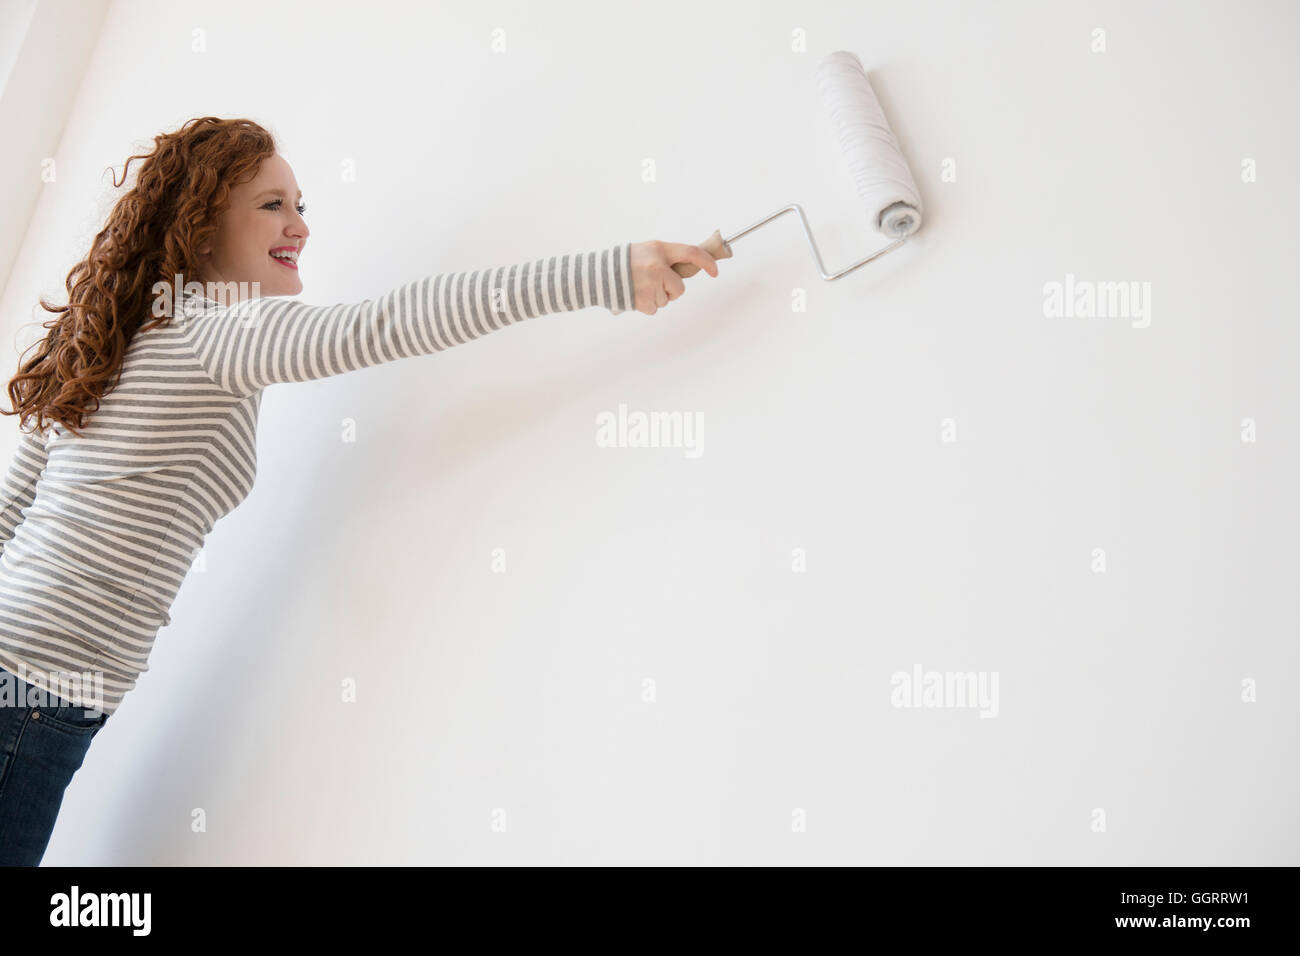 Caucasian woman painting wall white with paint roller Stock Photo